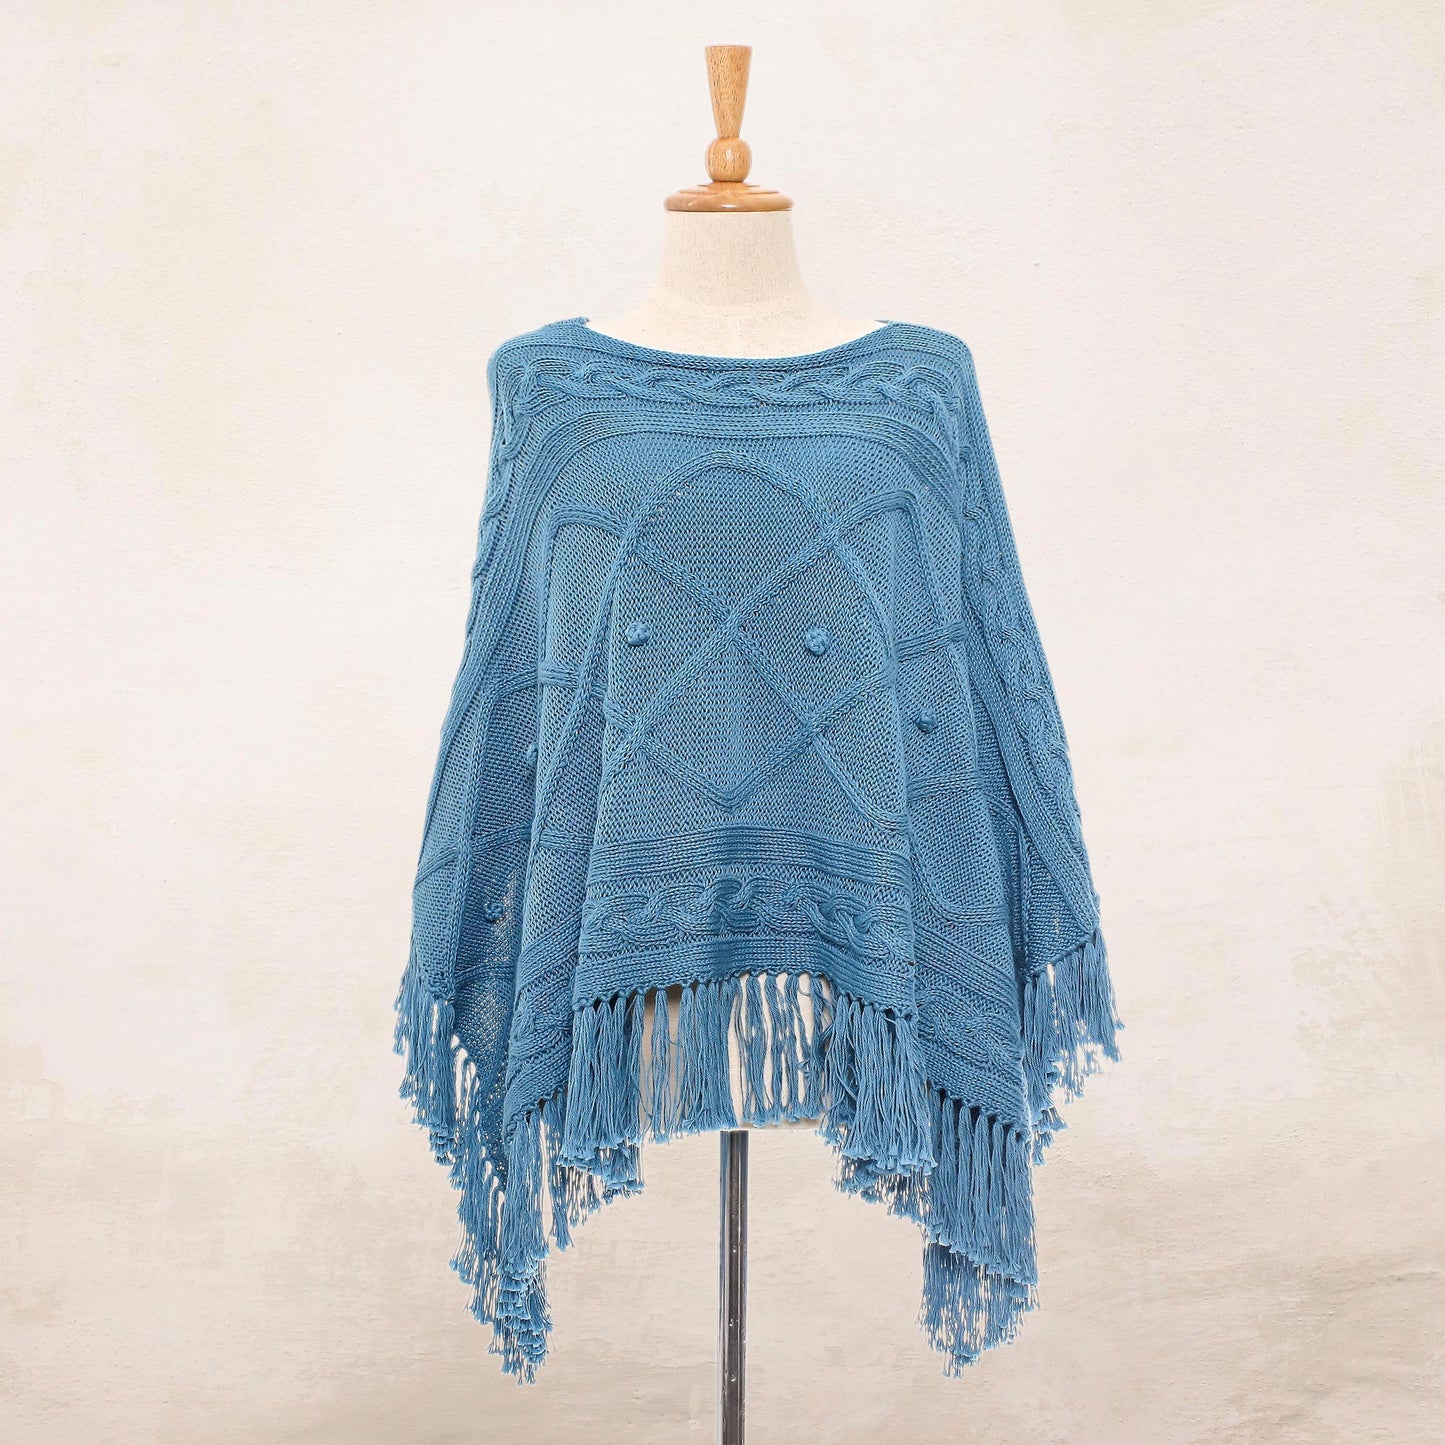 Charming Knit in Cerulean Short Knit Cotton Poncho in Cerulean from Thailand